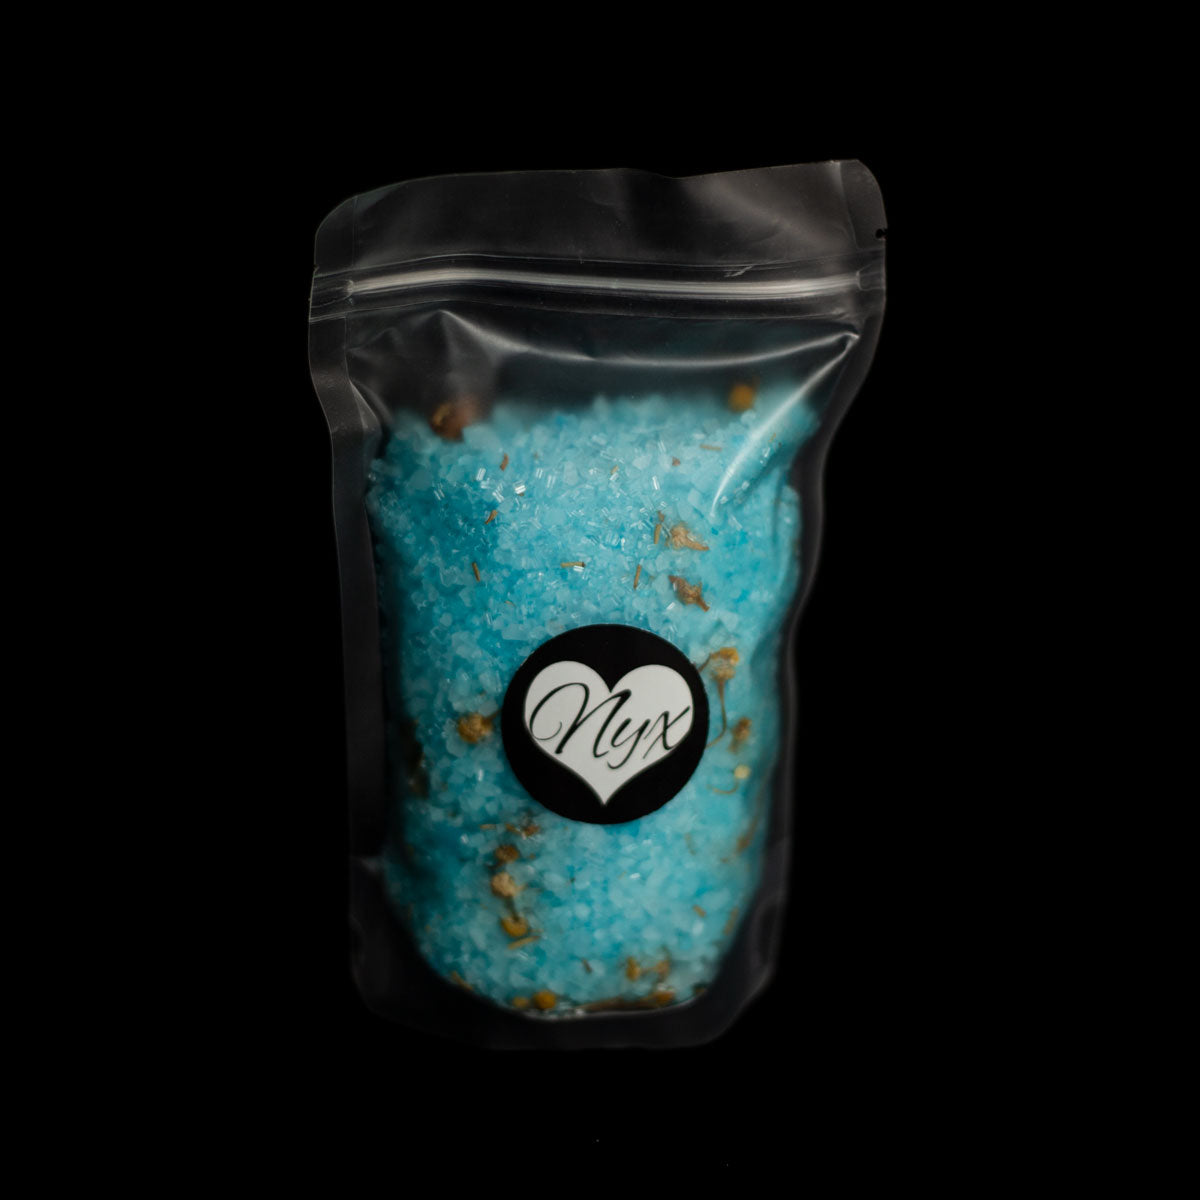 A clear/frosted bag filled with blue bath salts with botanicals